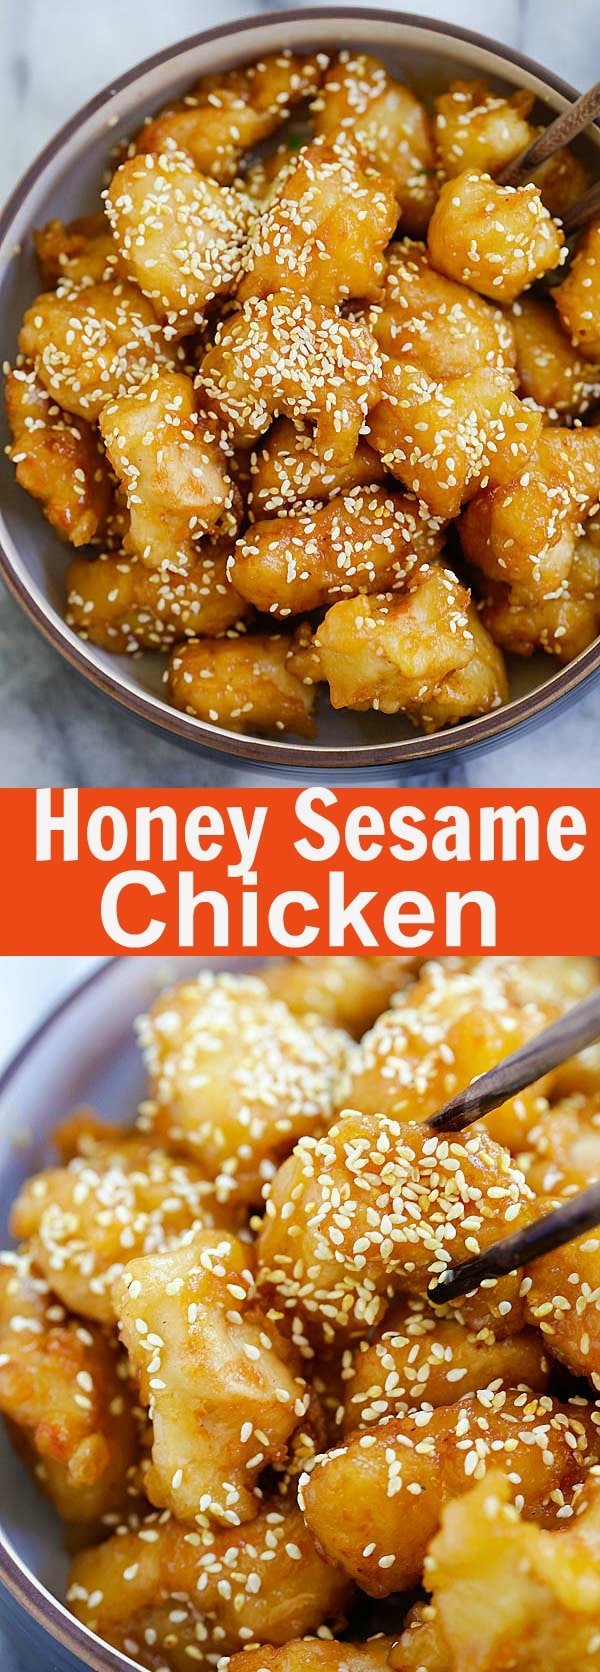 Best ever honey sesame chicken. Easy honey sesame chicken recipe with fried chicken pieces in a sticky sweet and savory honey sesame sauce | rasamalaysia.com